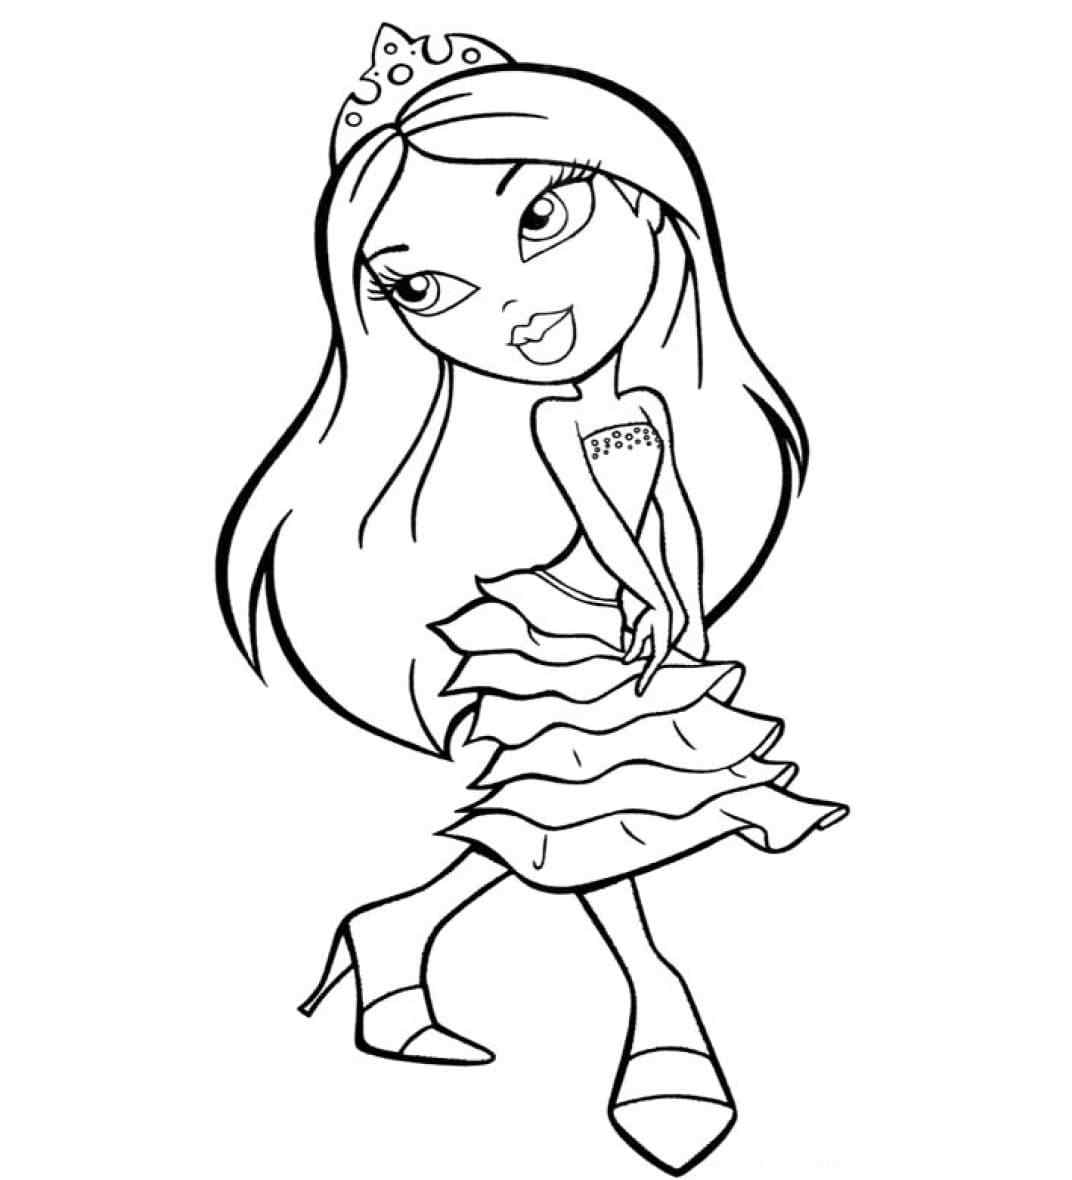 Princess With A Crown On Her Head Coloring Page